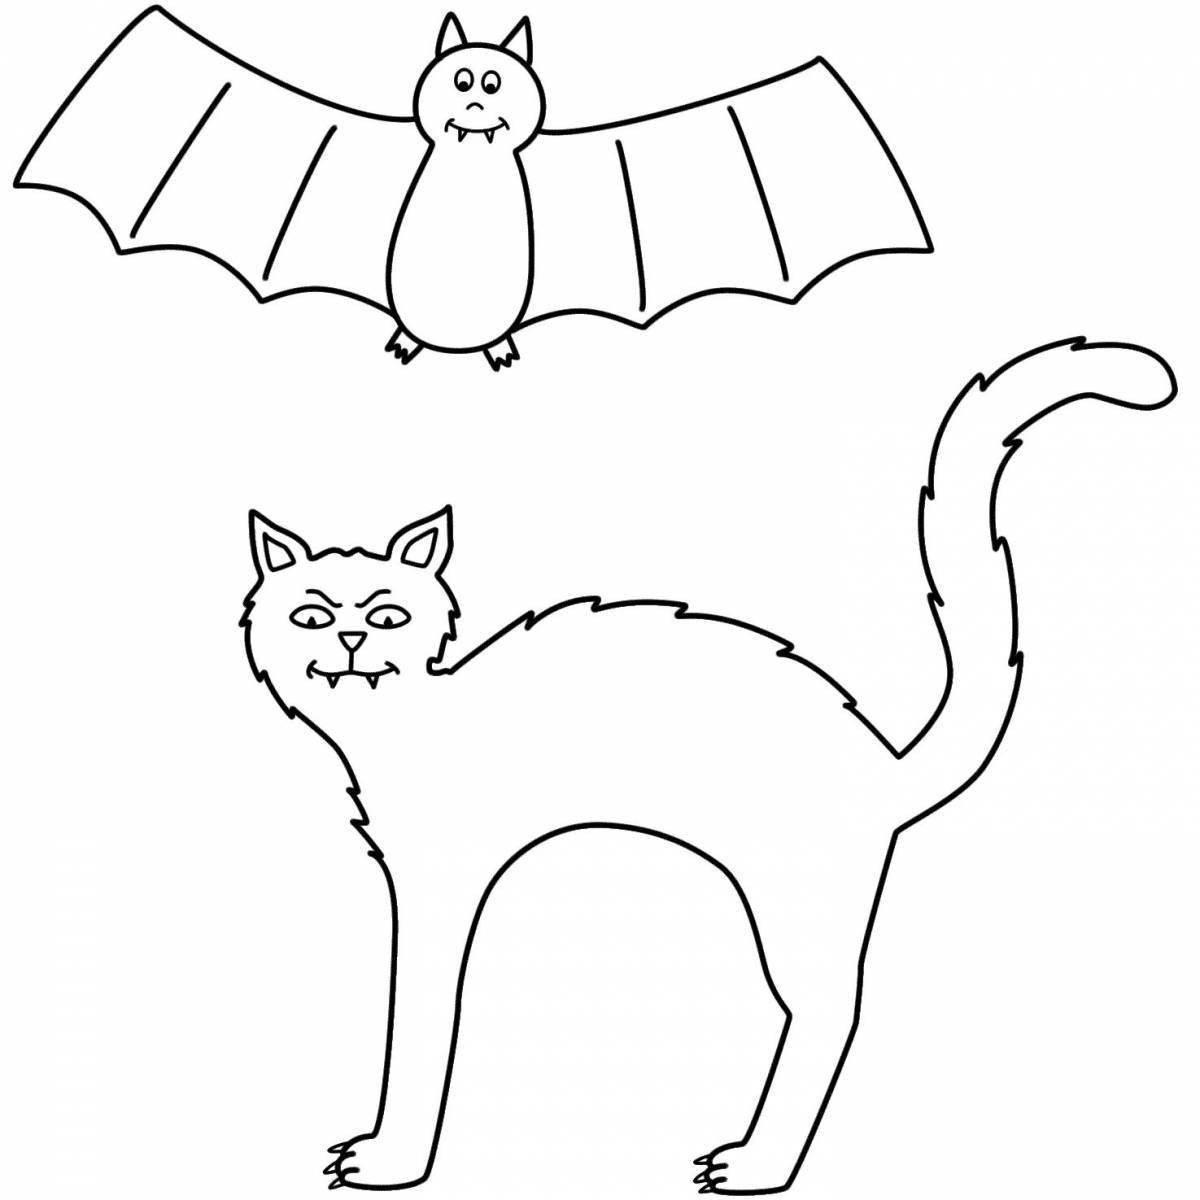 Adorable black cat coloring page